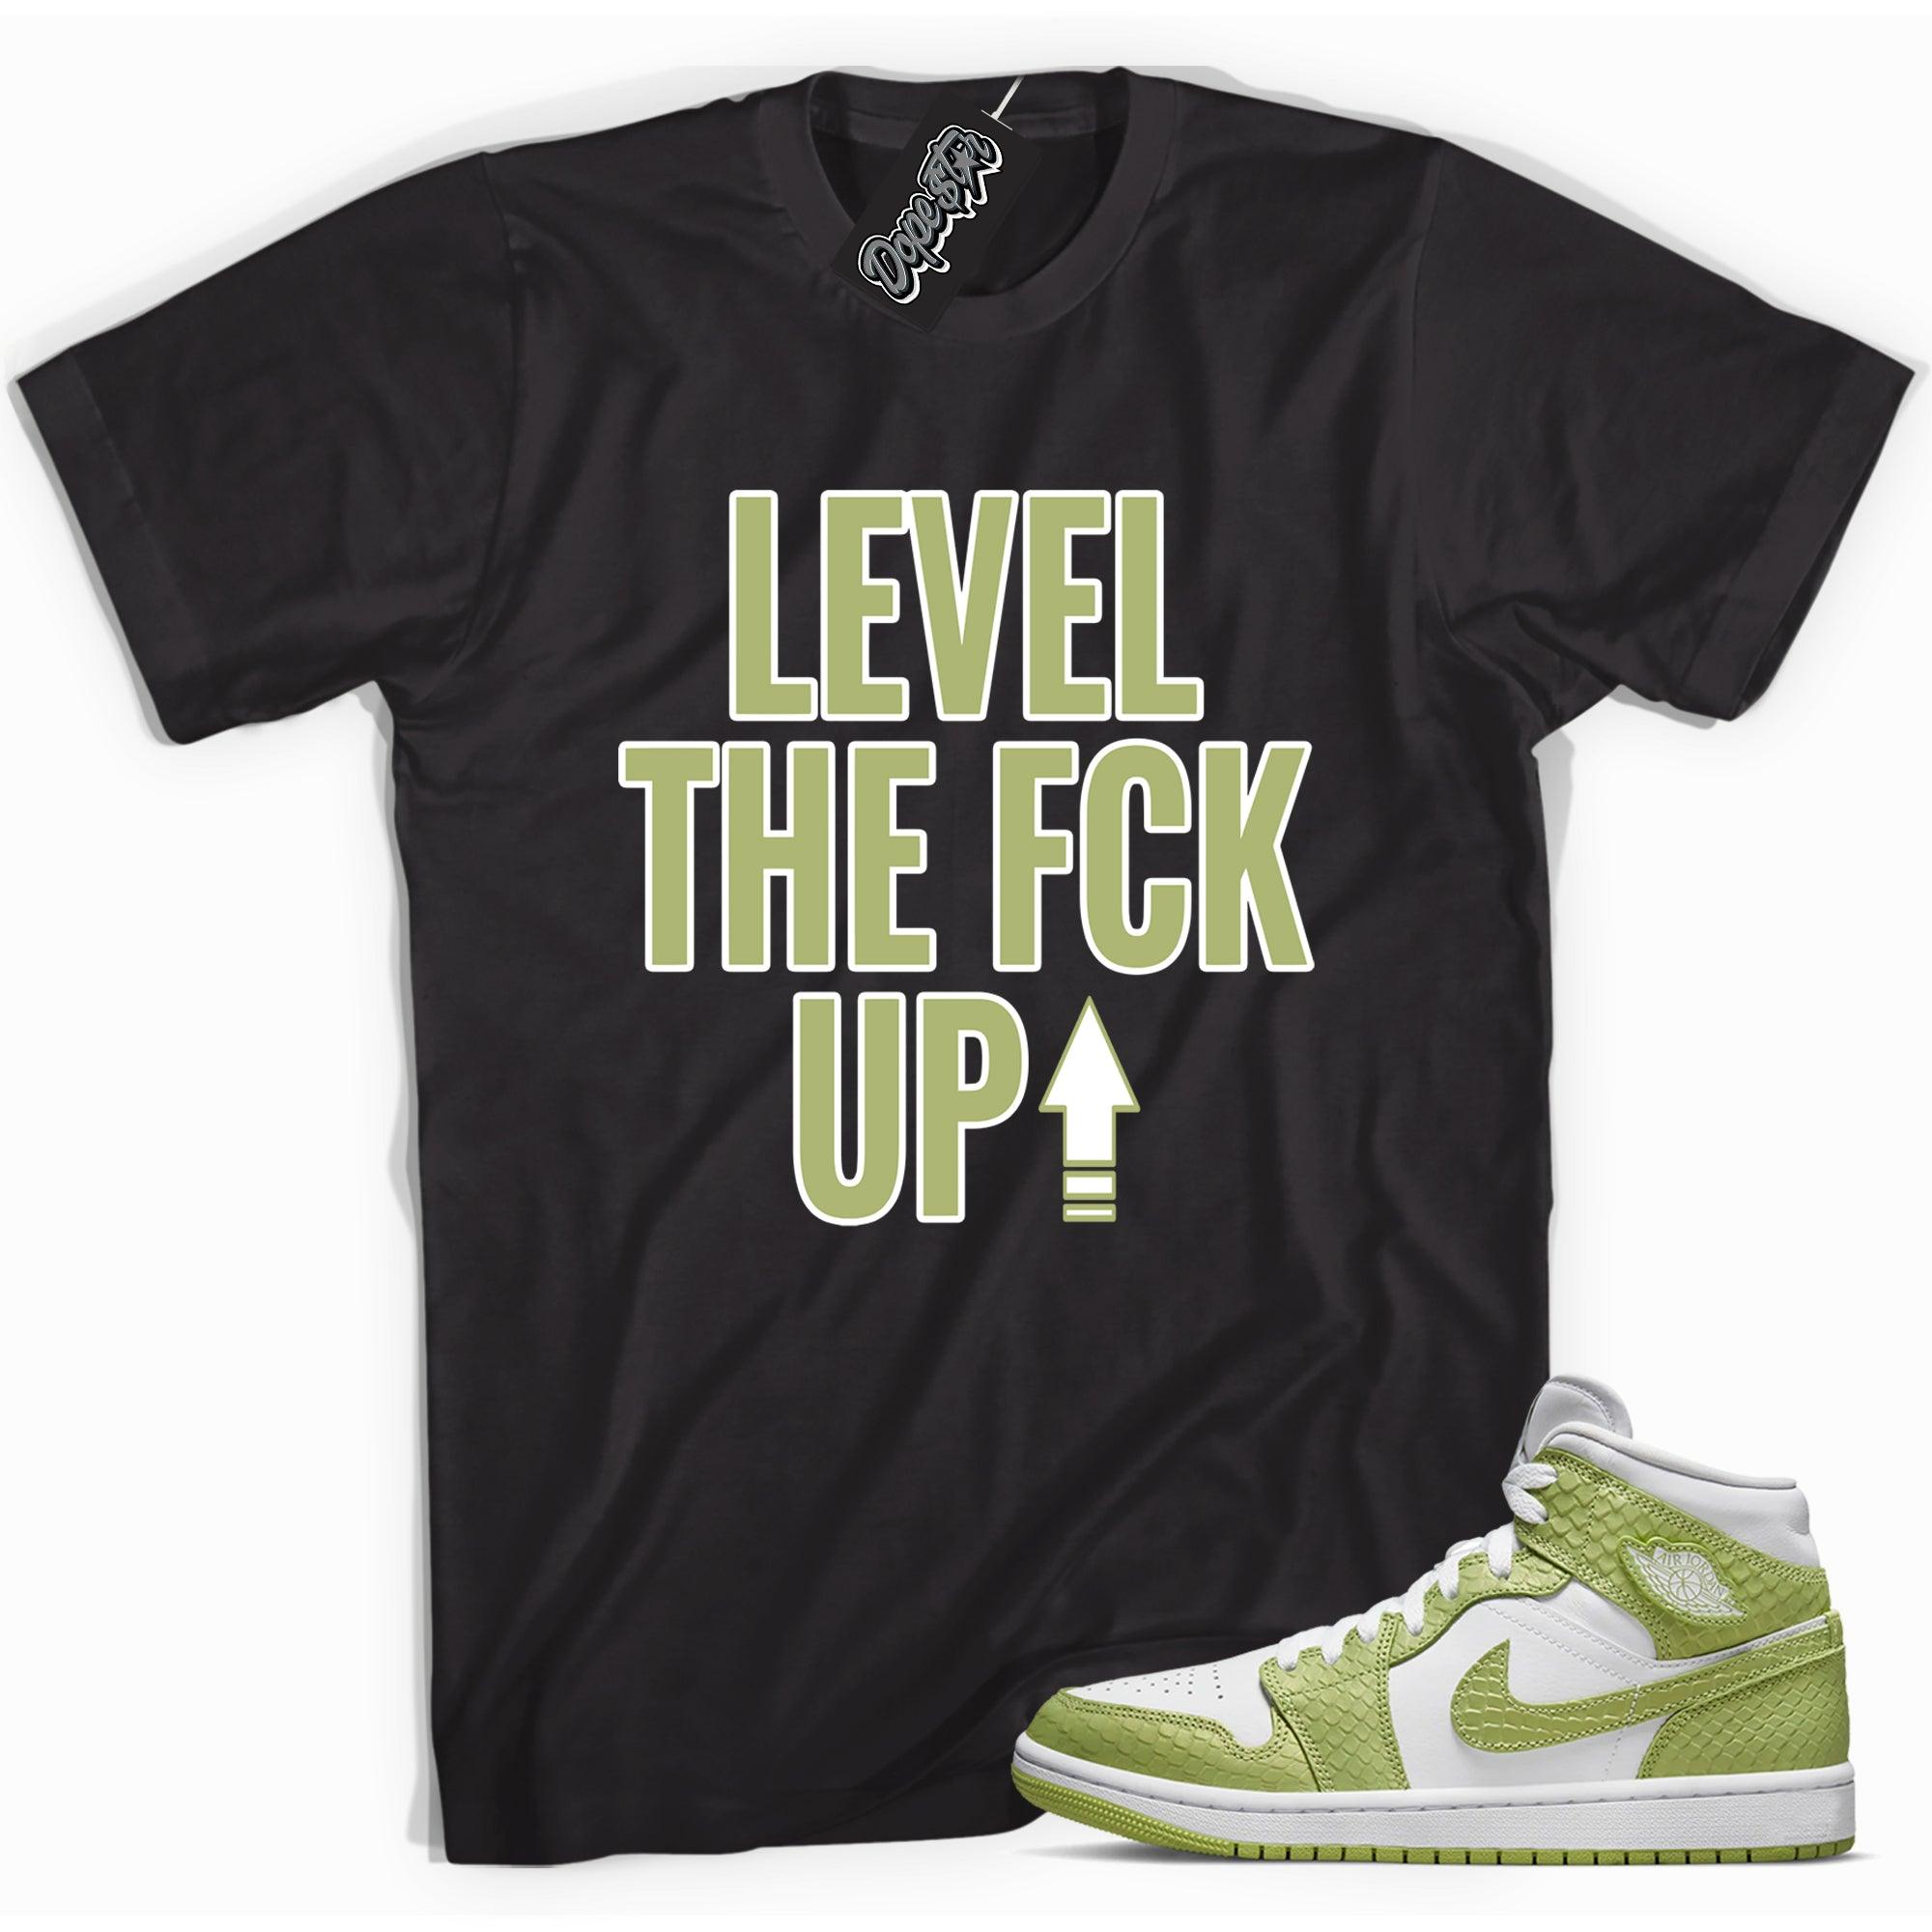 Cool black graphic tee with 'Level Up' print, that perfectly matches  Air Jordan 1 Mid Green Python sneakers.